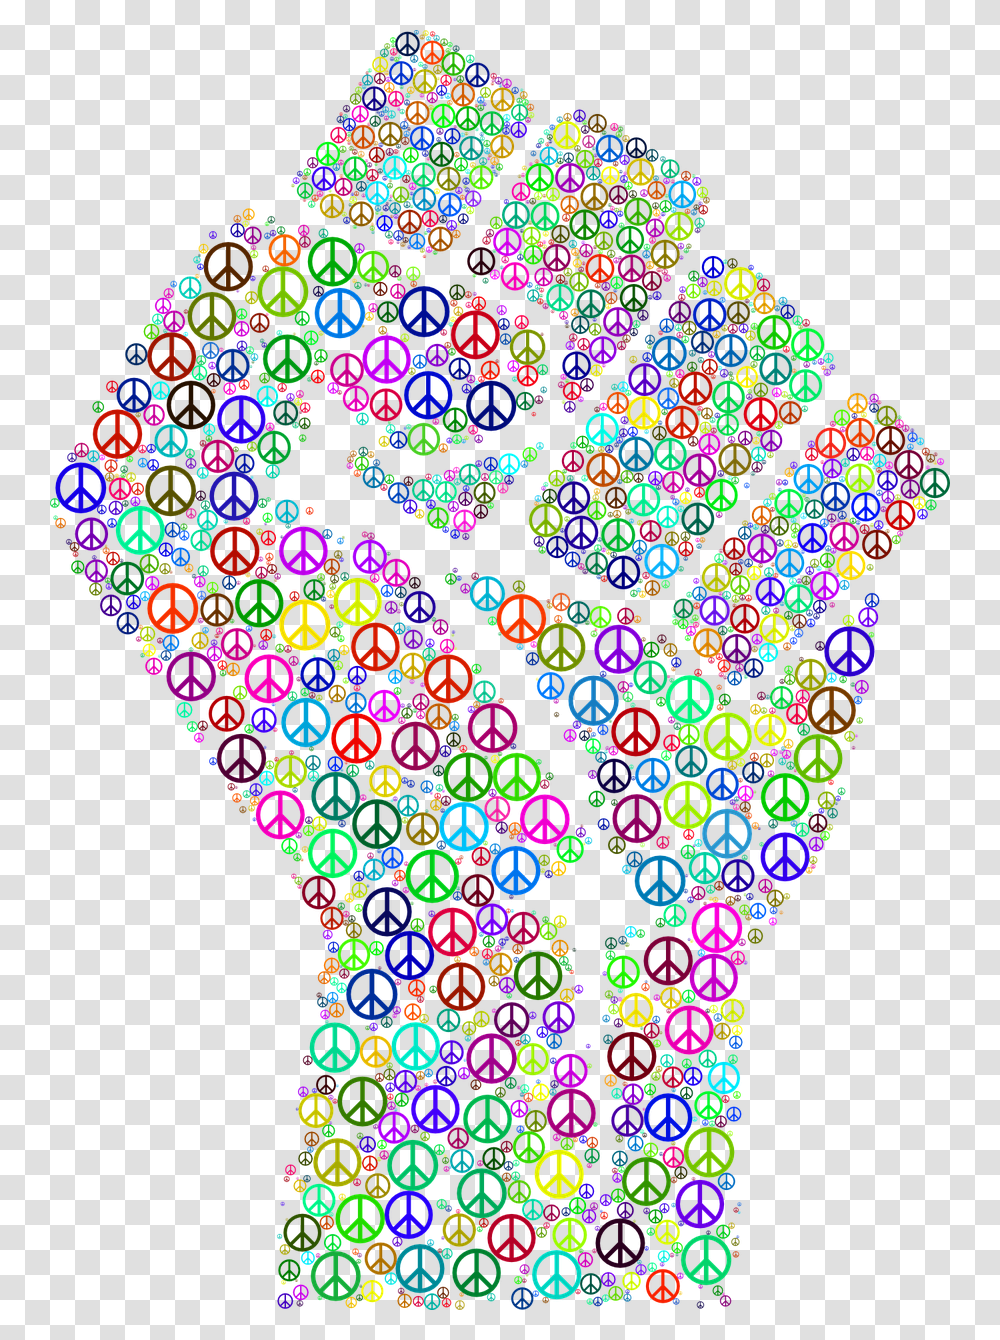 Fist Hand Clenched Fingers Peace Sign Symbol Civil Rights Movement, Light Transparent Png